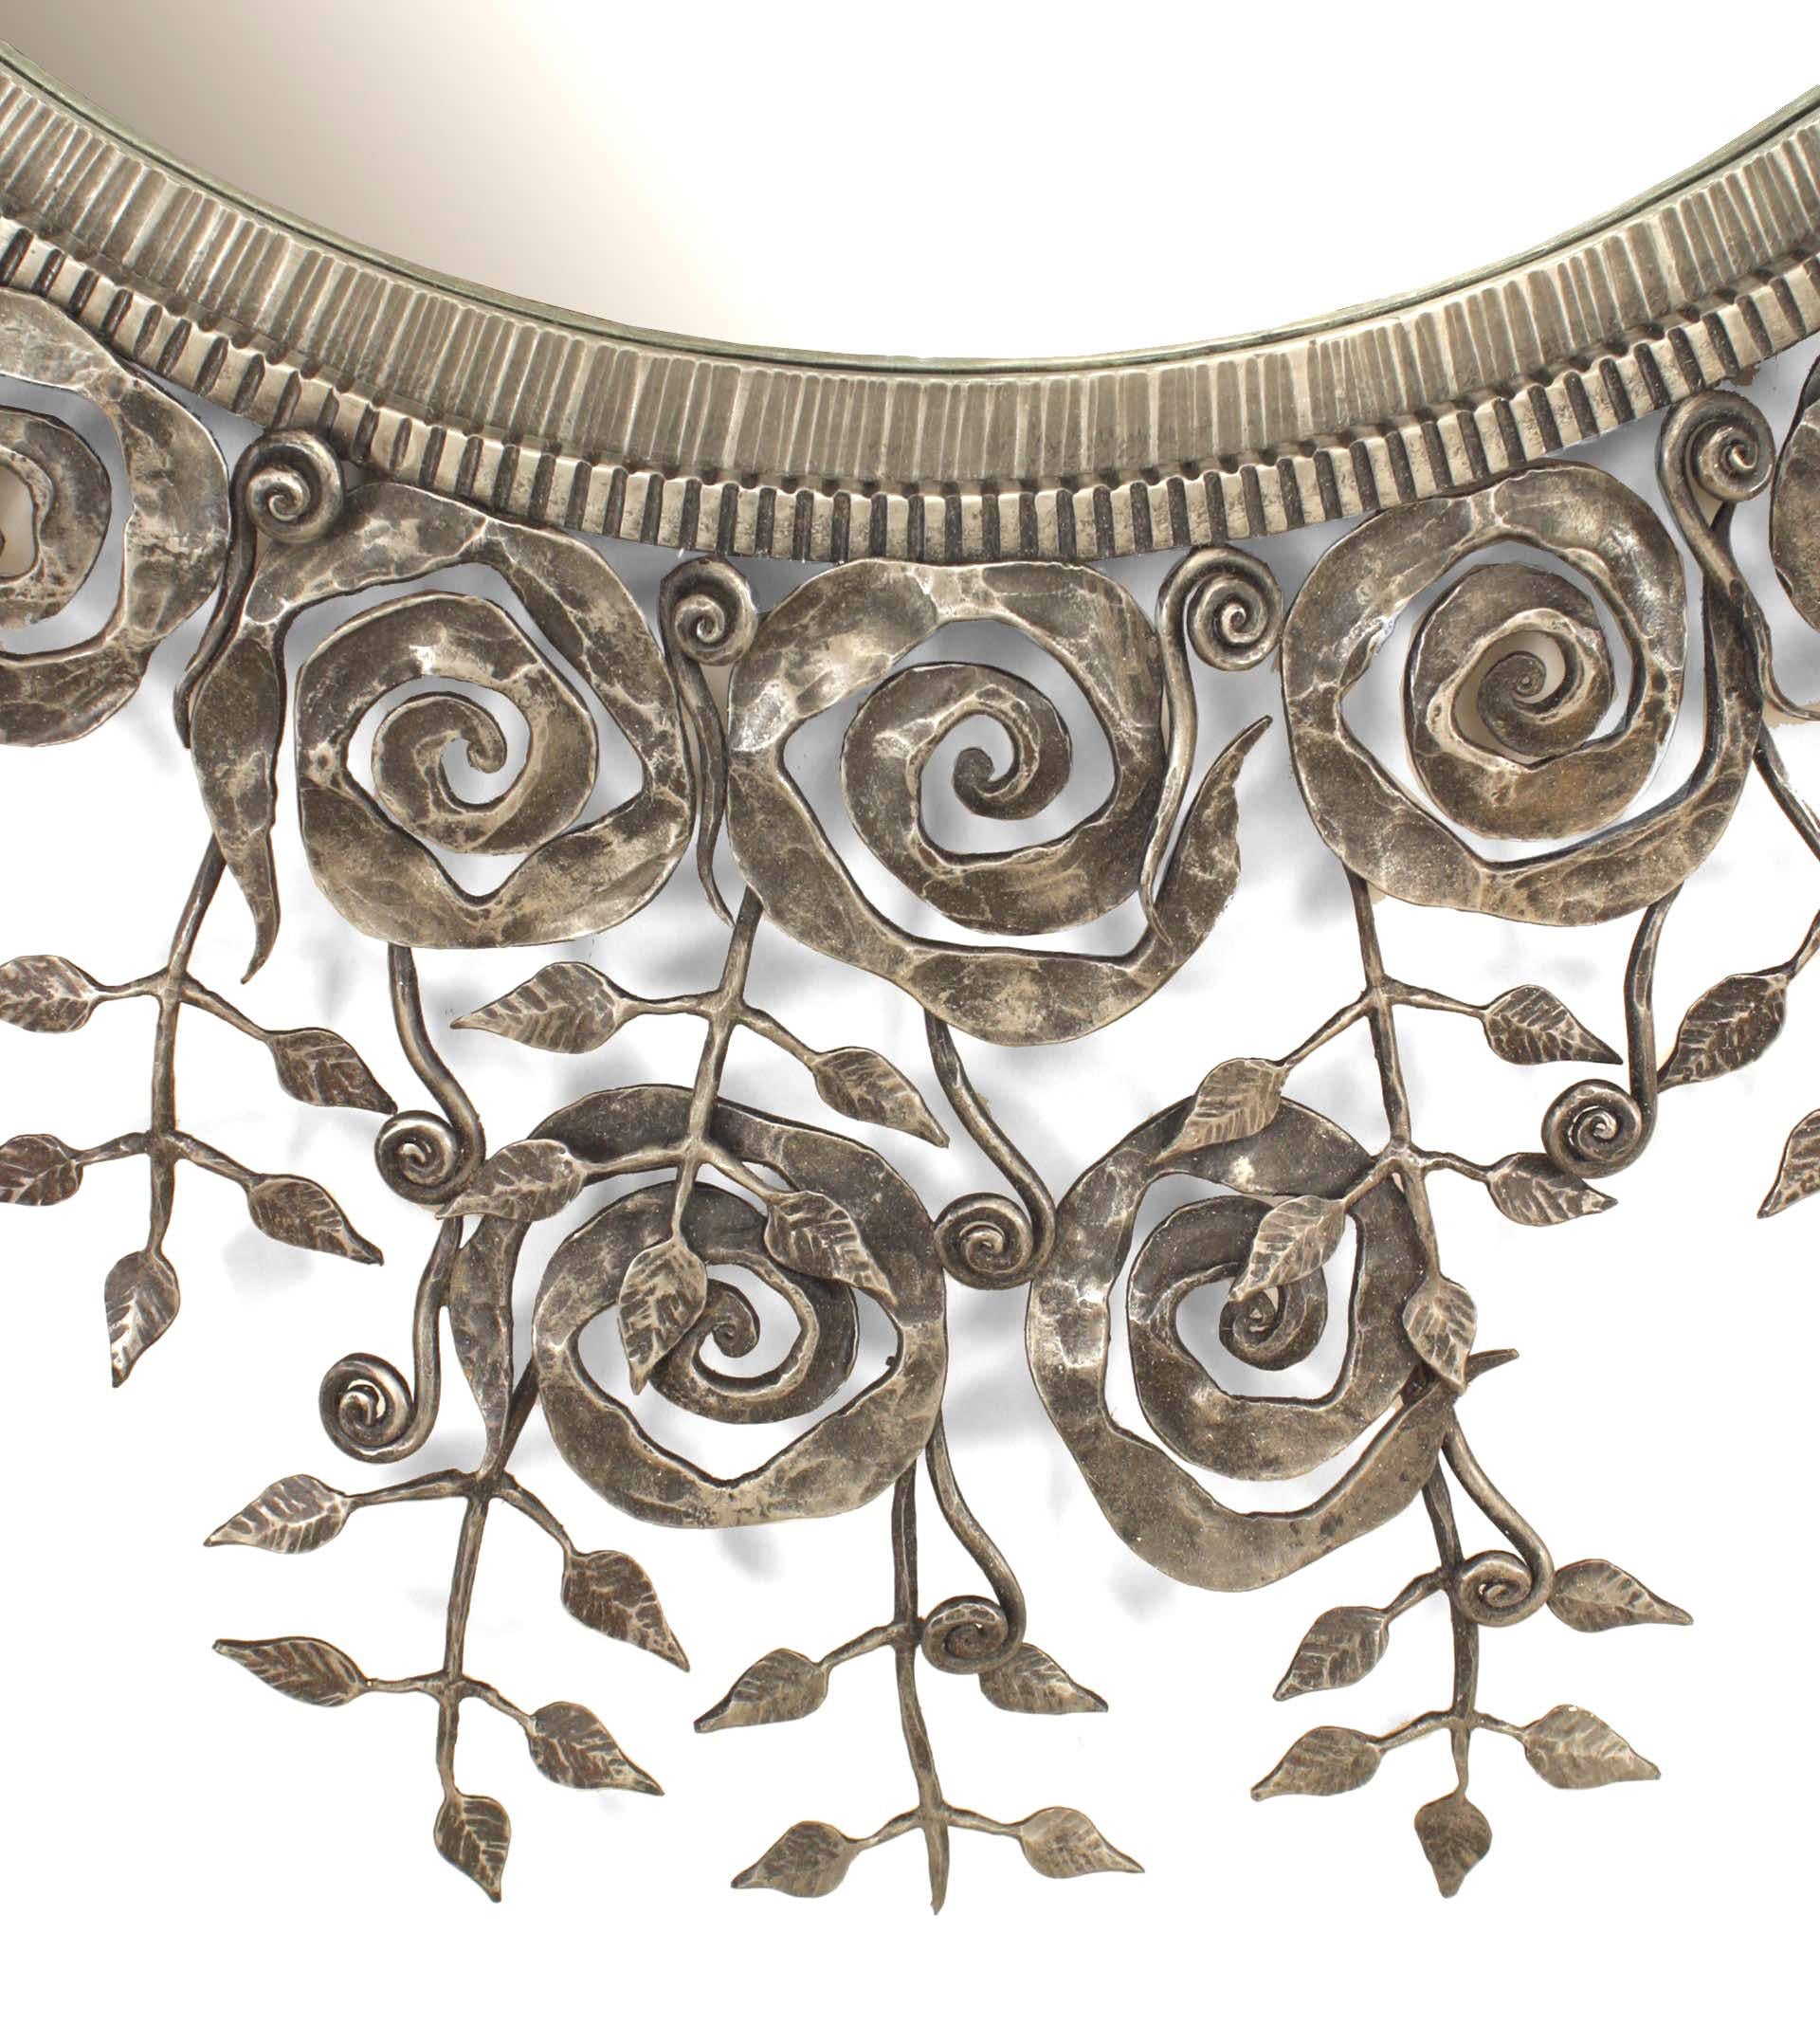 French Art Deco-style wrought iron wall mirror with a filigree floral and scroll border on two sides of a centered round mirror.
